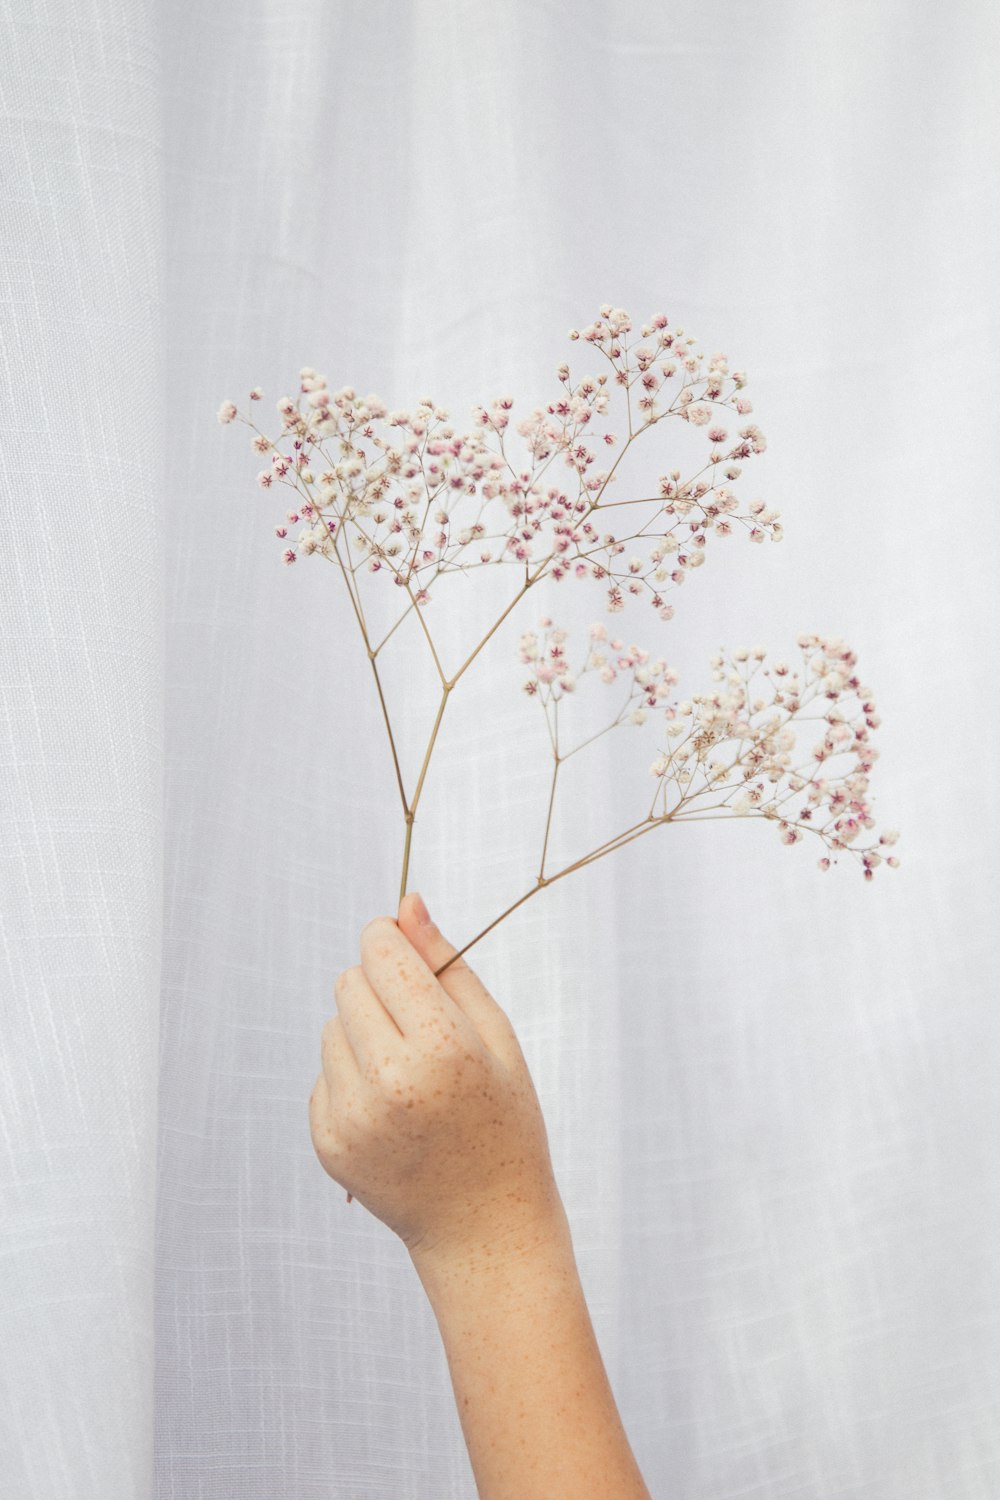 person holding white flower in front of white curtain